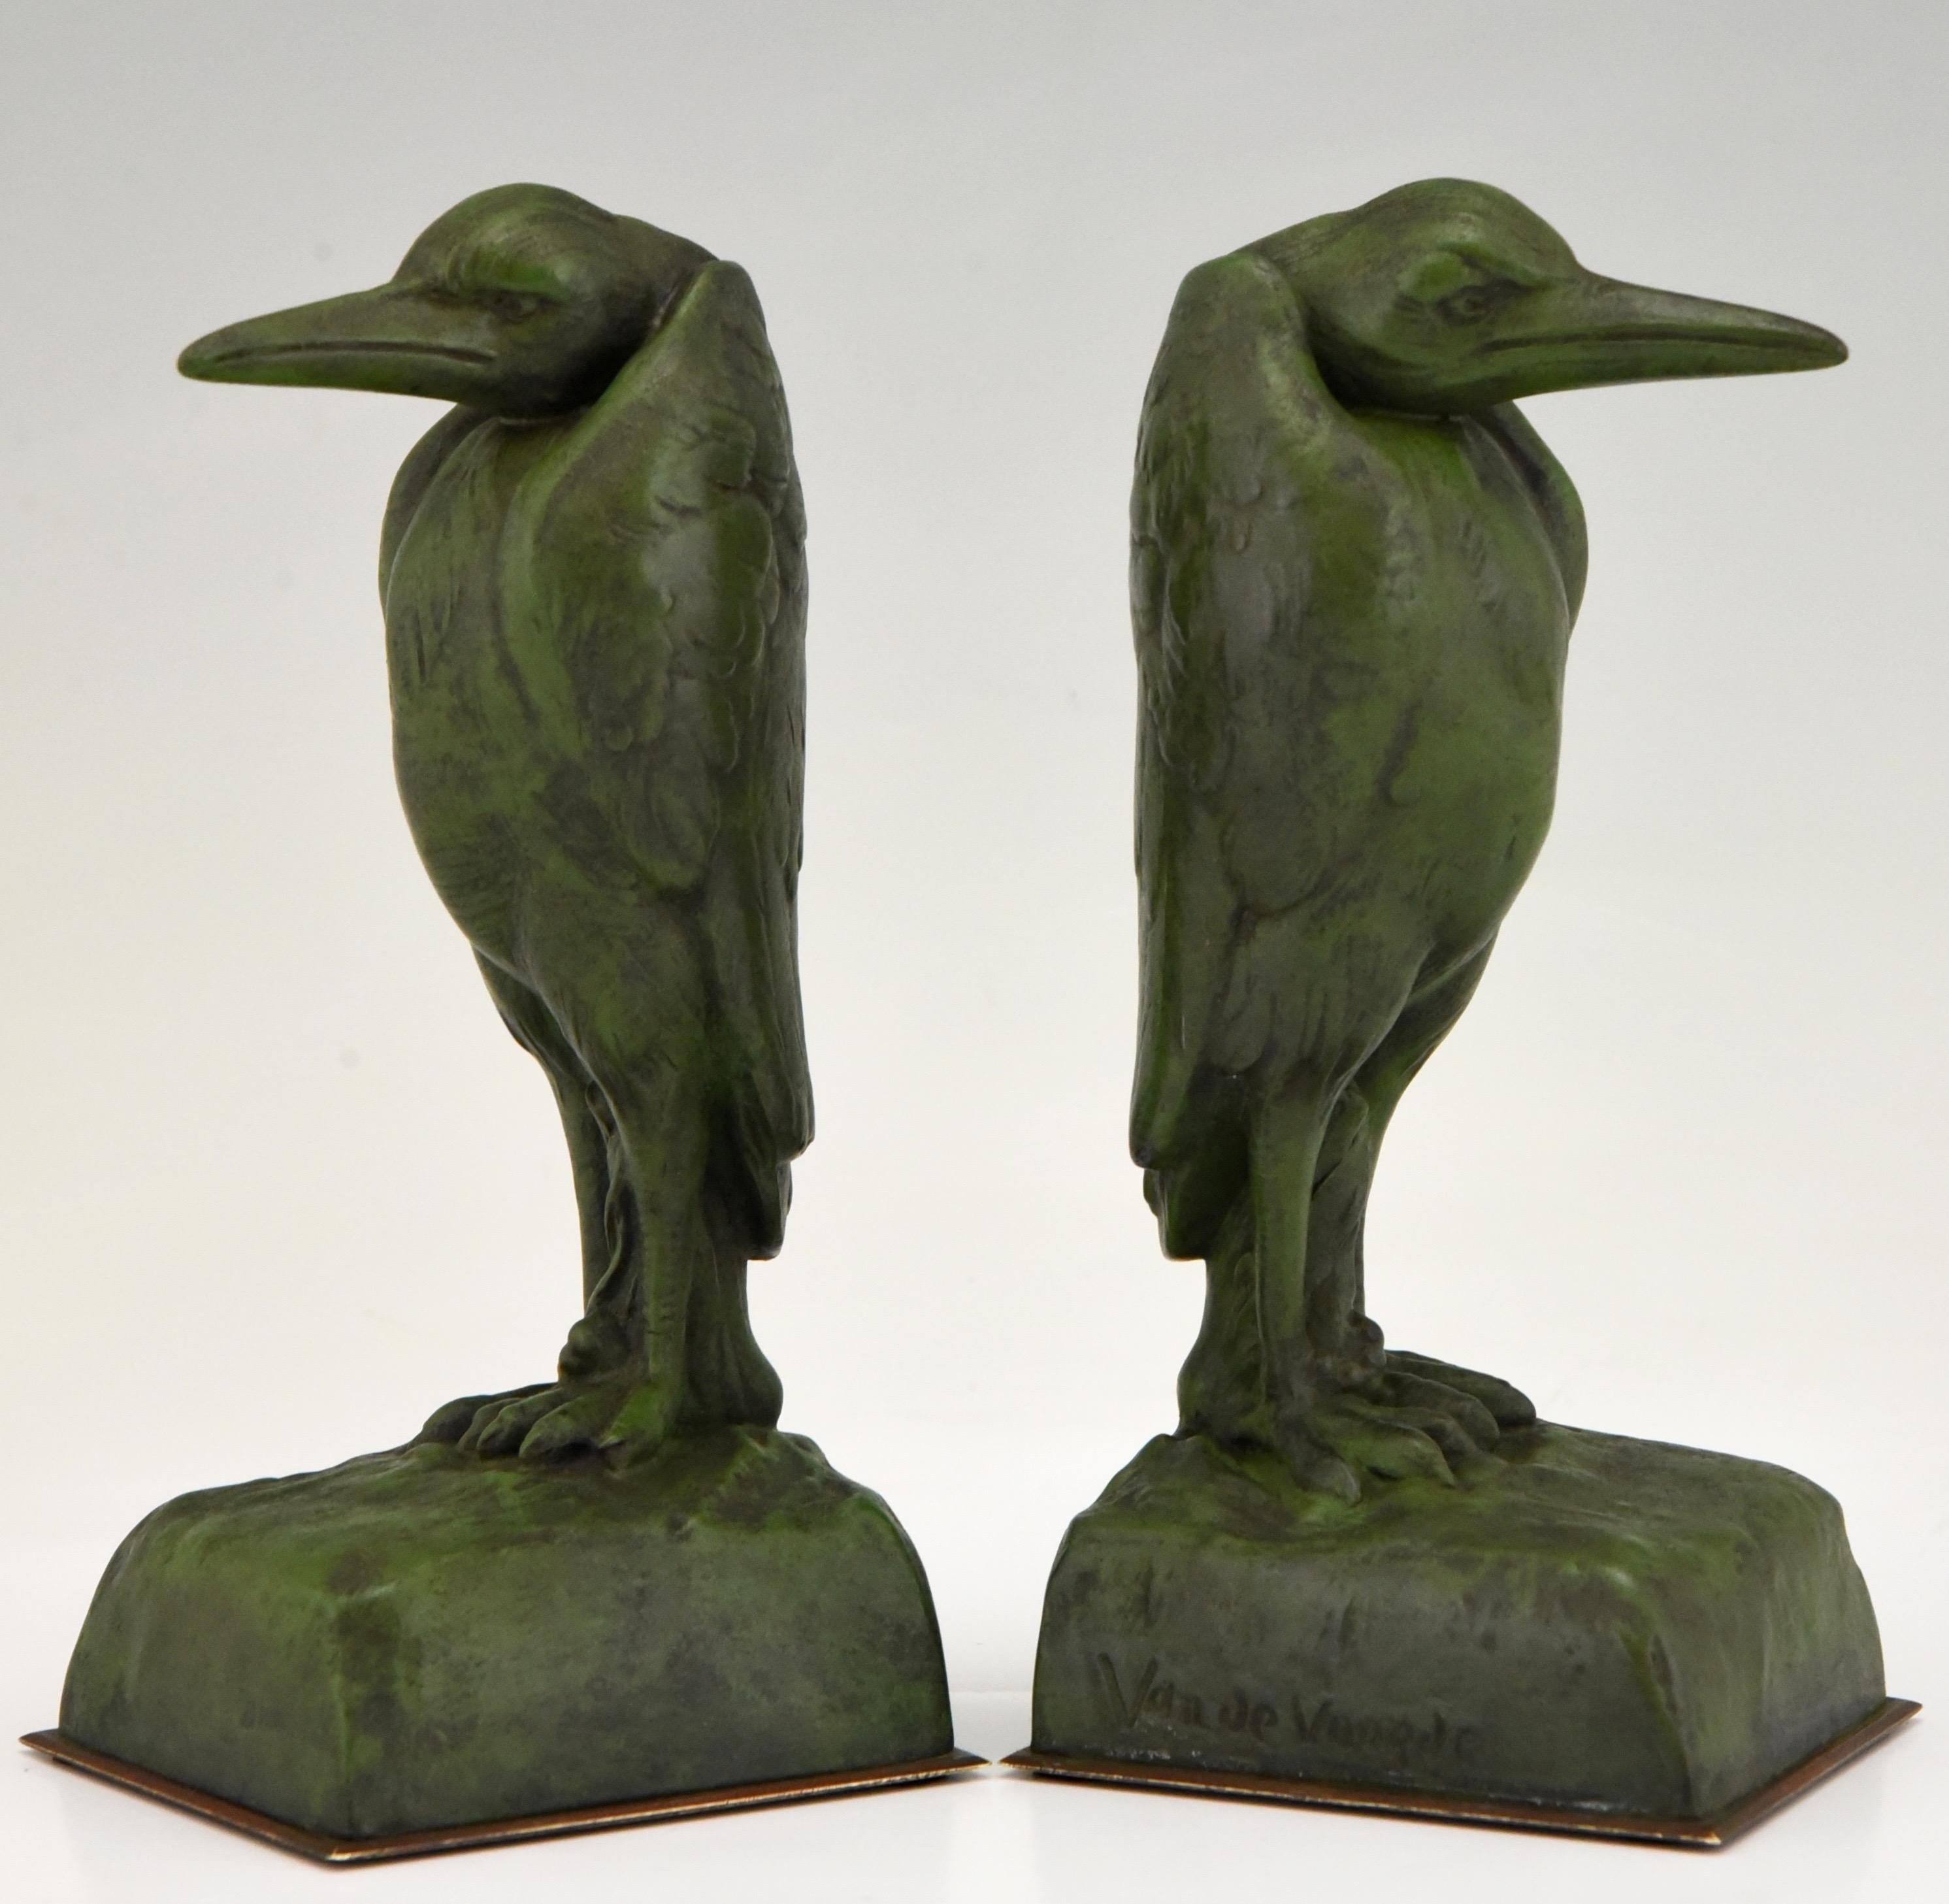 A nice pair of Art Deco Marabou bookends by Georges Van de Voorde,
Belgian artist born in 1878 worked in France. The bird sculptures are in Art Metal with a dark green patina.
Literature
These bookends are illustrated on page 328 of ? “Art Deco